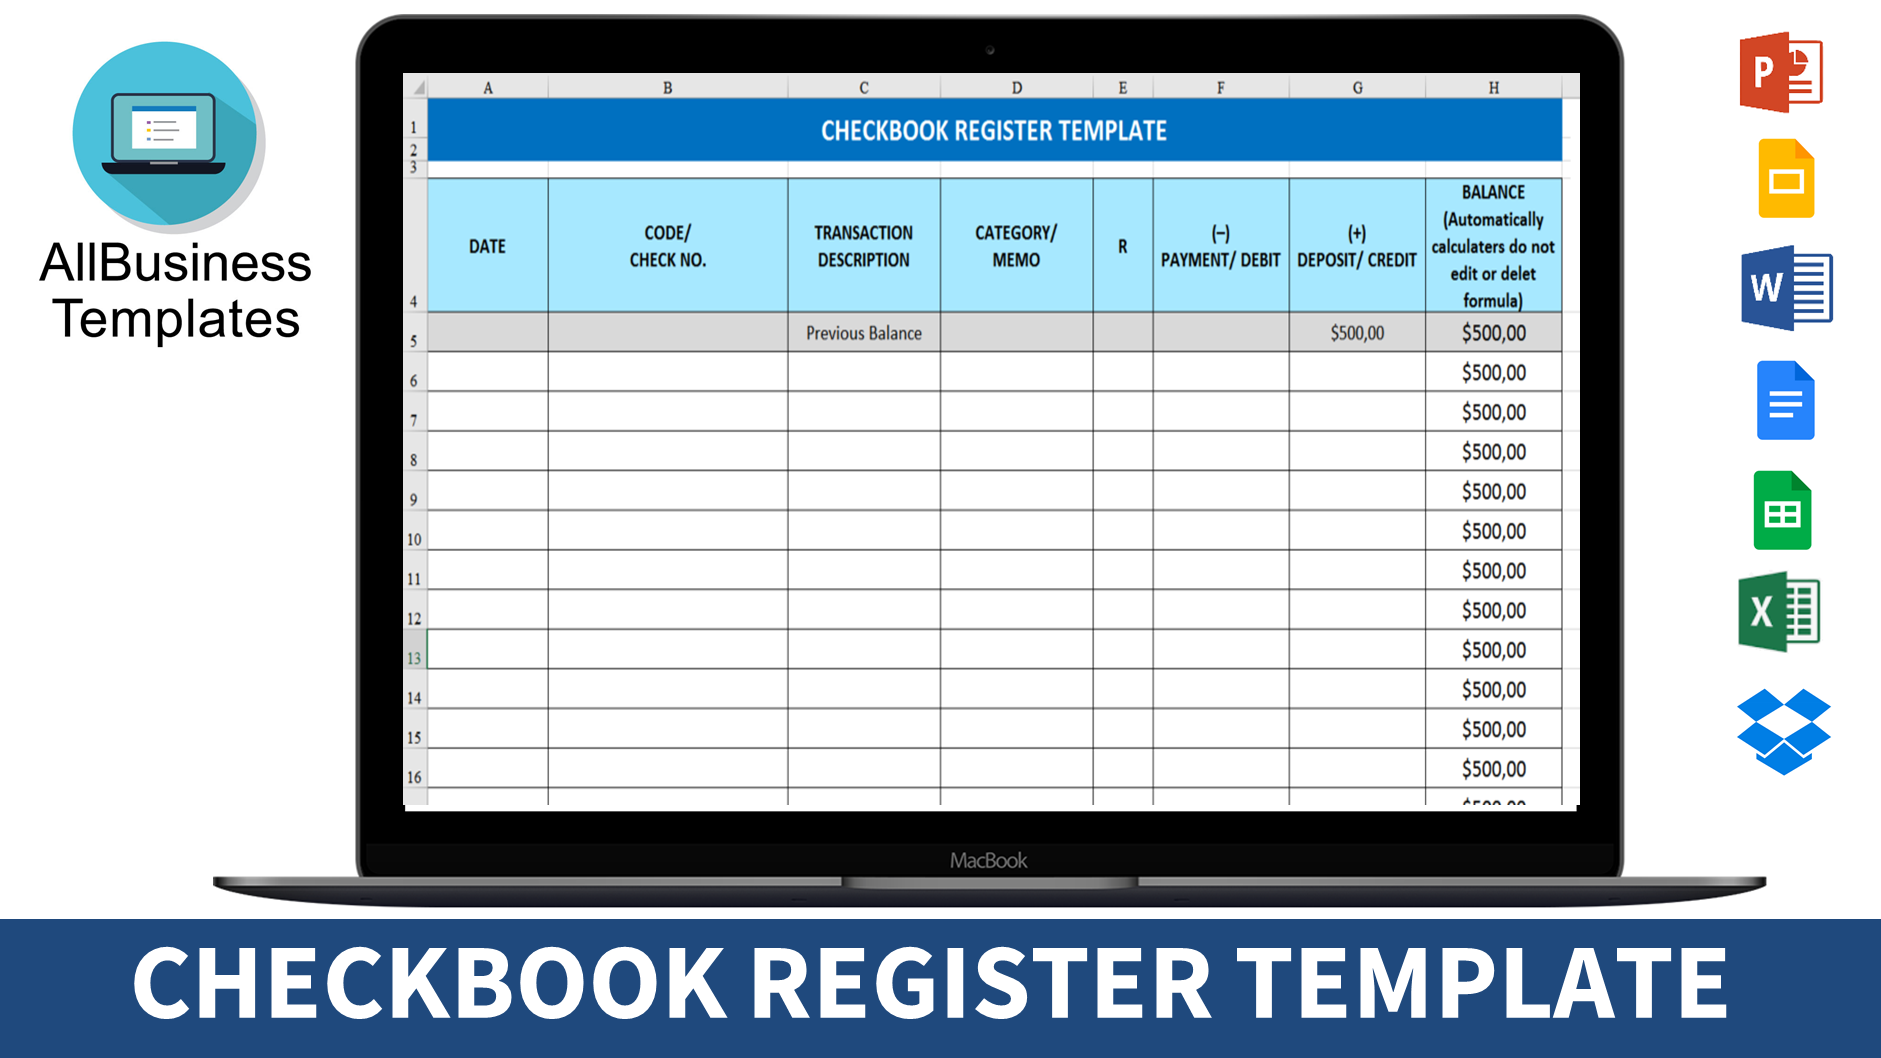 free printable check register template